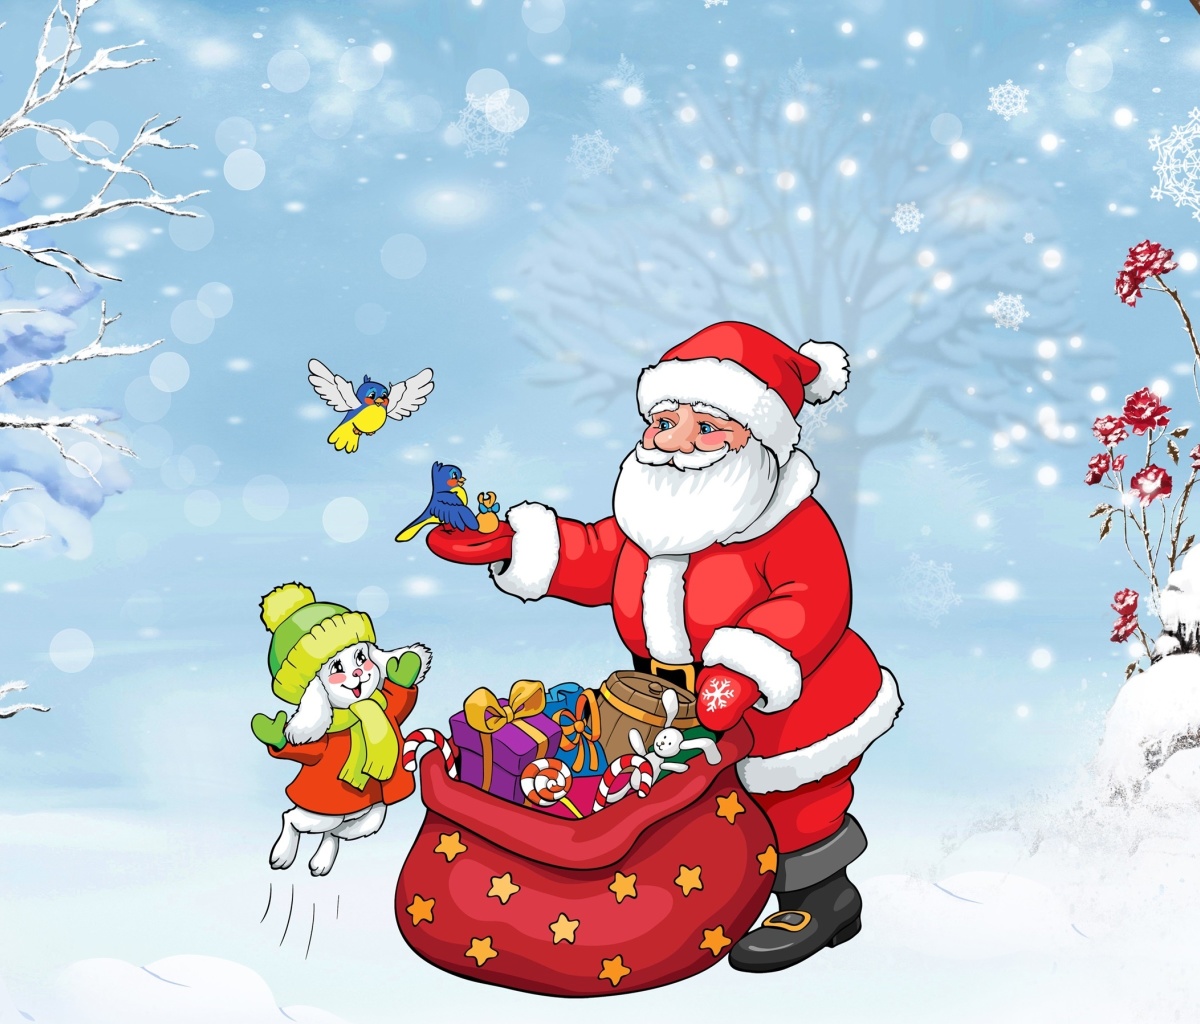 Santa Claus And The Christmas Adventure wallpaper 1200x1024